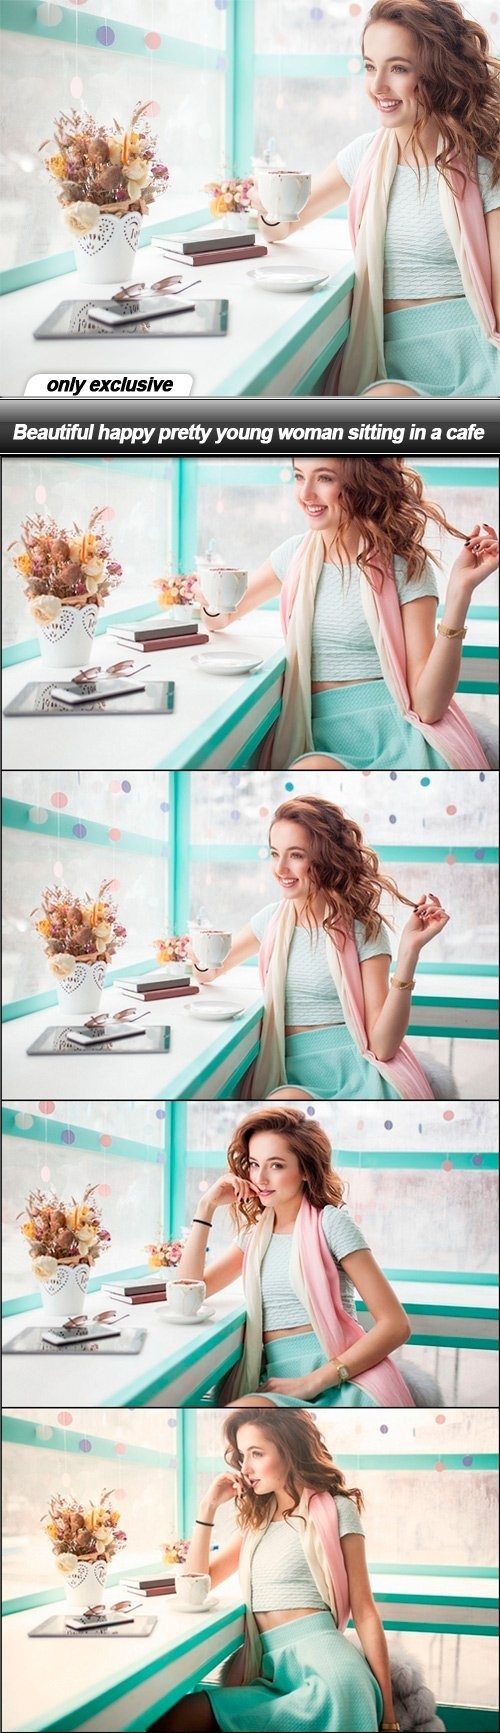 Beautiful happy pretty young woman sitting in a cafe - 6 UHQ JPEG